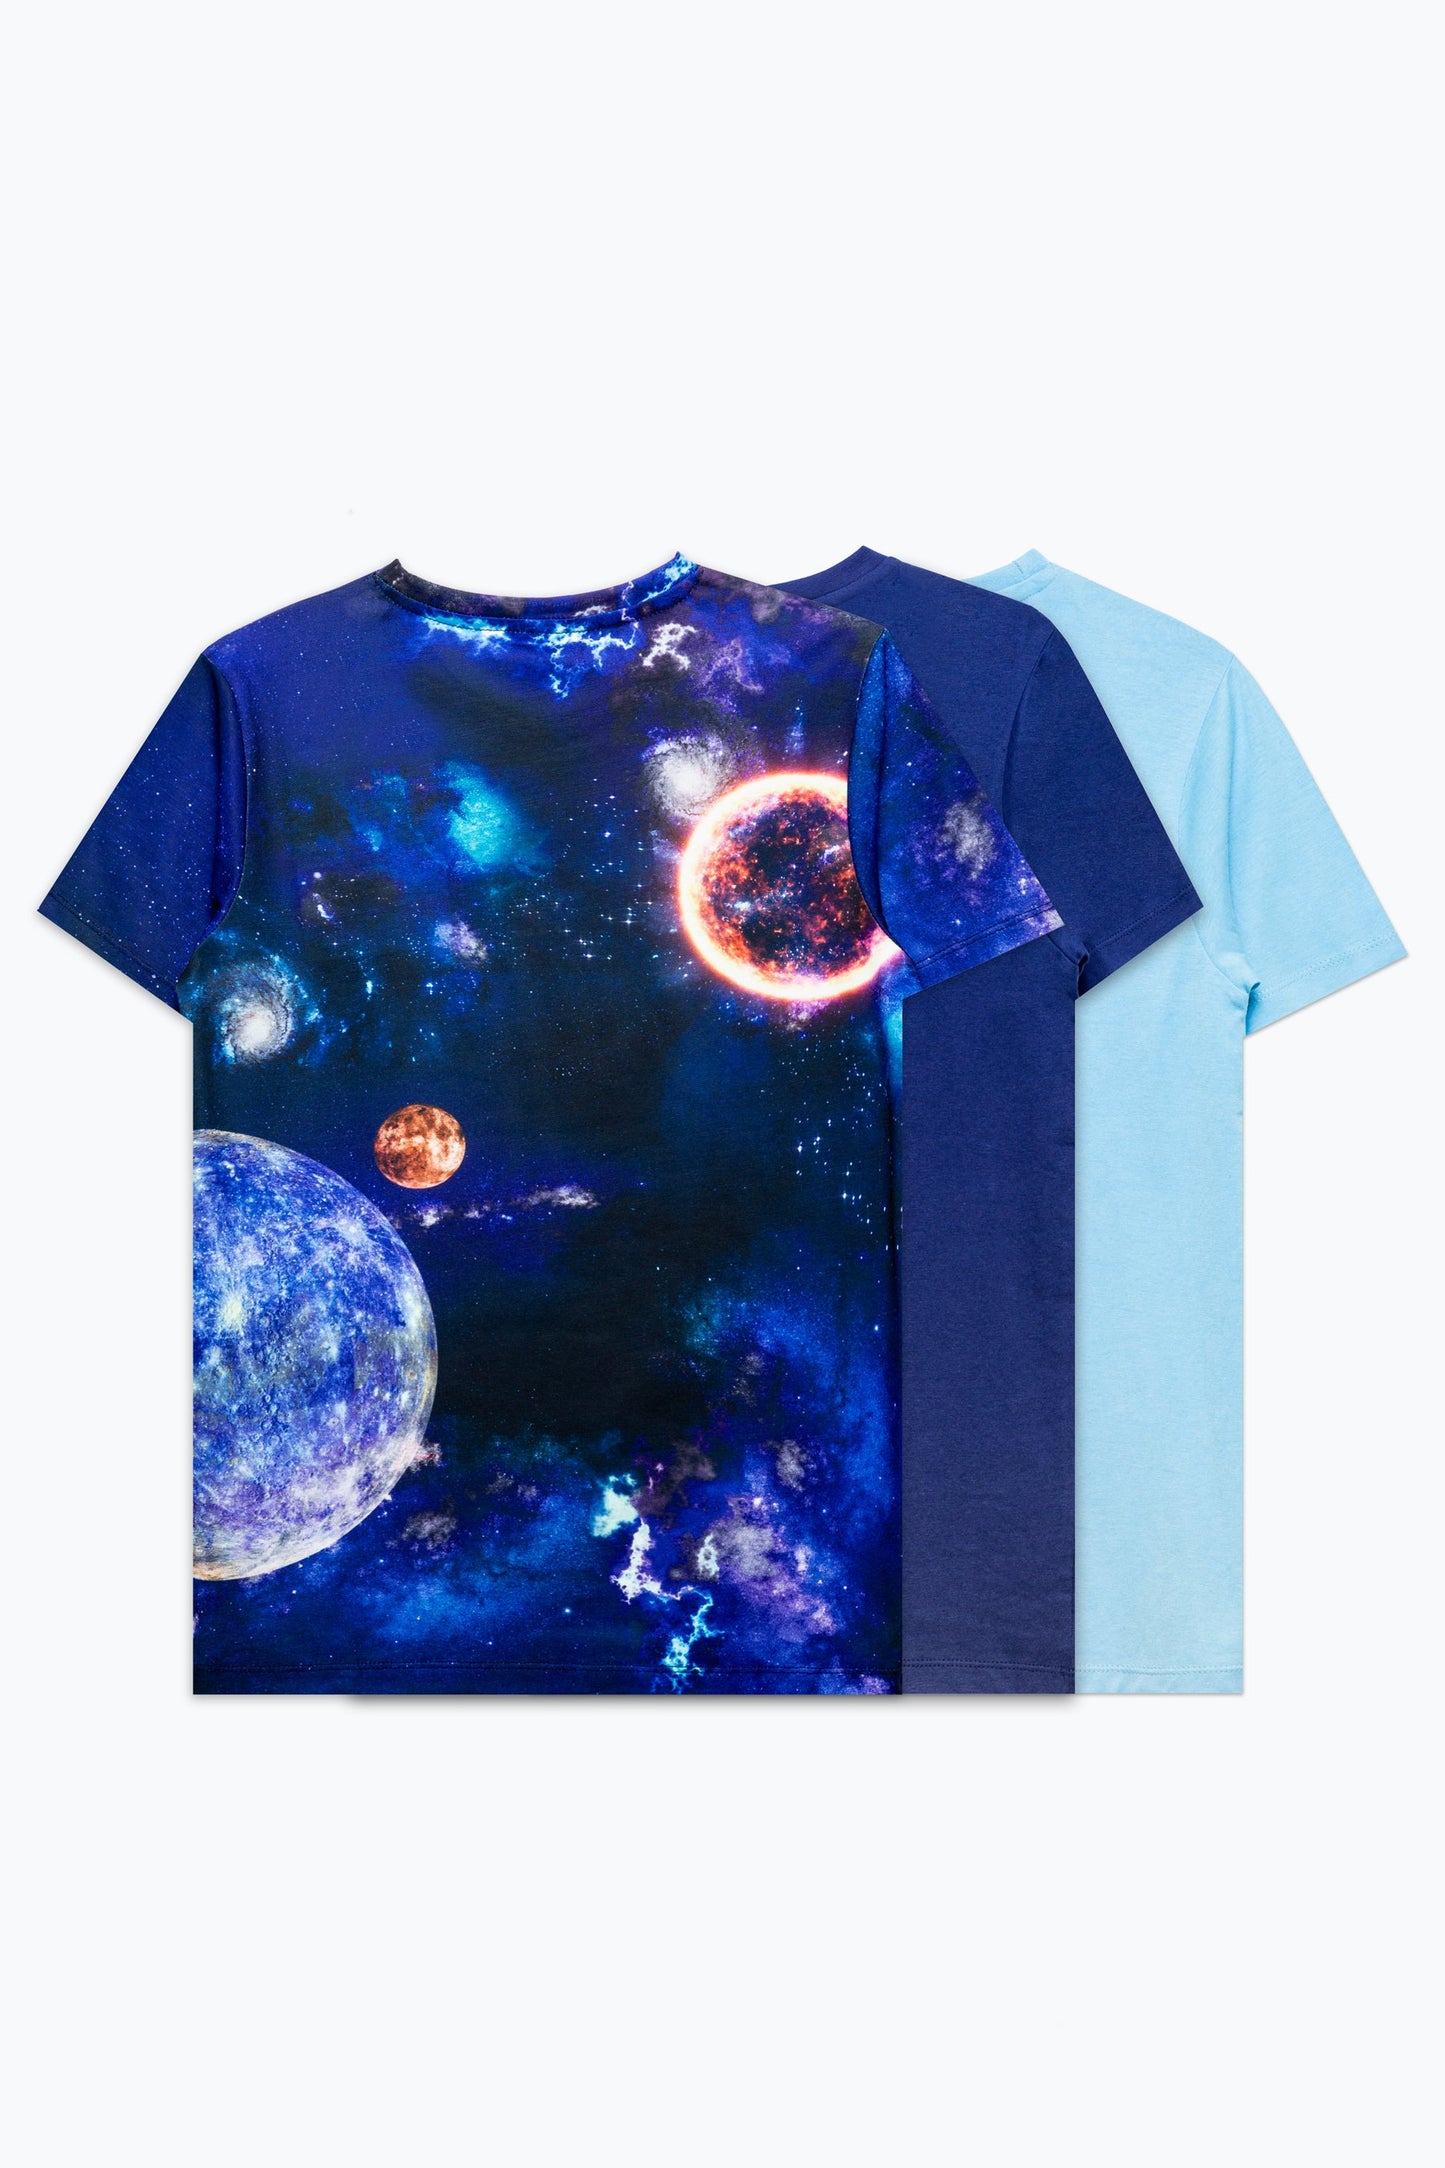 HYPE THREE PACK NAVY/BLUE/SPACE KIDS T-SHIRT